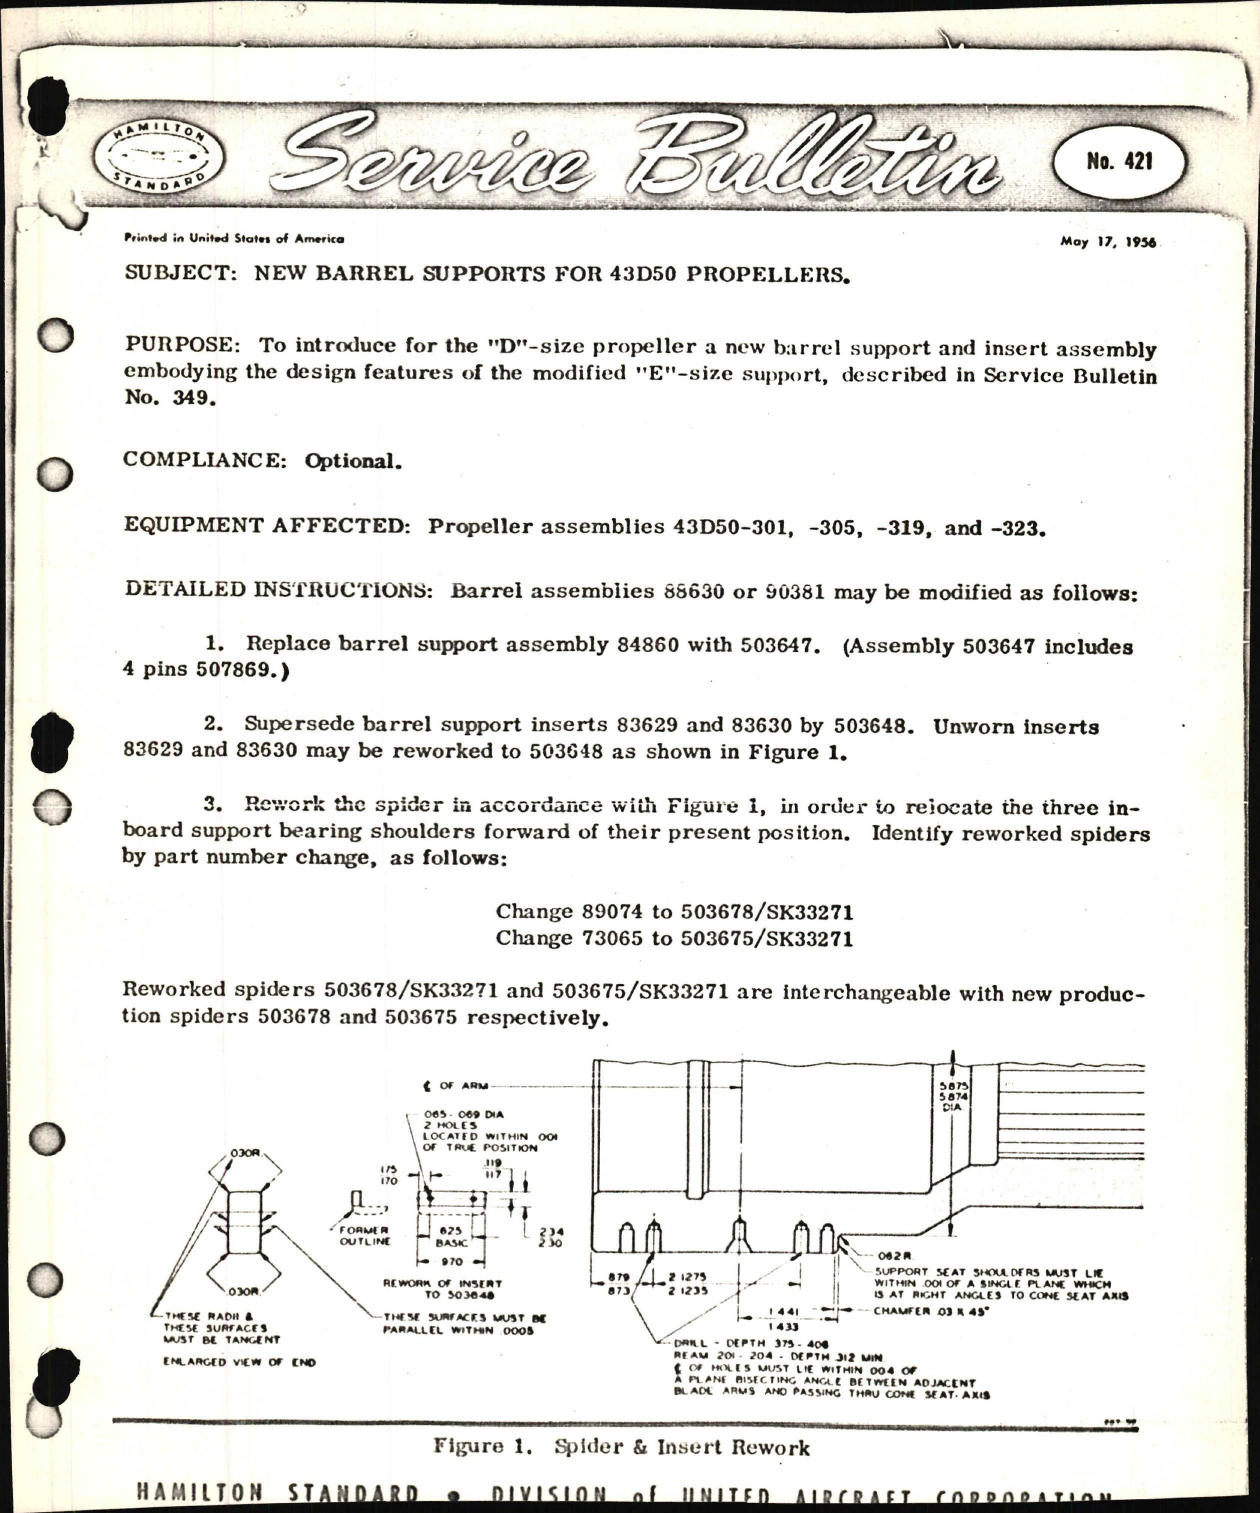 Sample page 1 from AirCorps Library document: New Barrel Supports for 43D50 Propellers